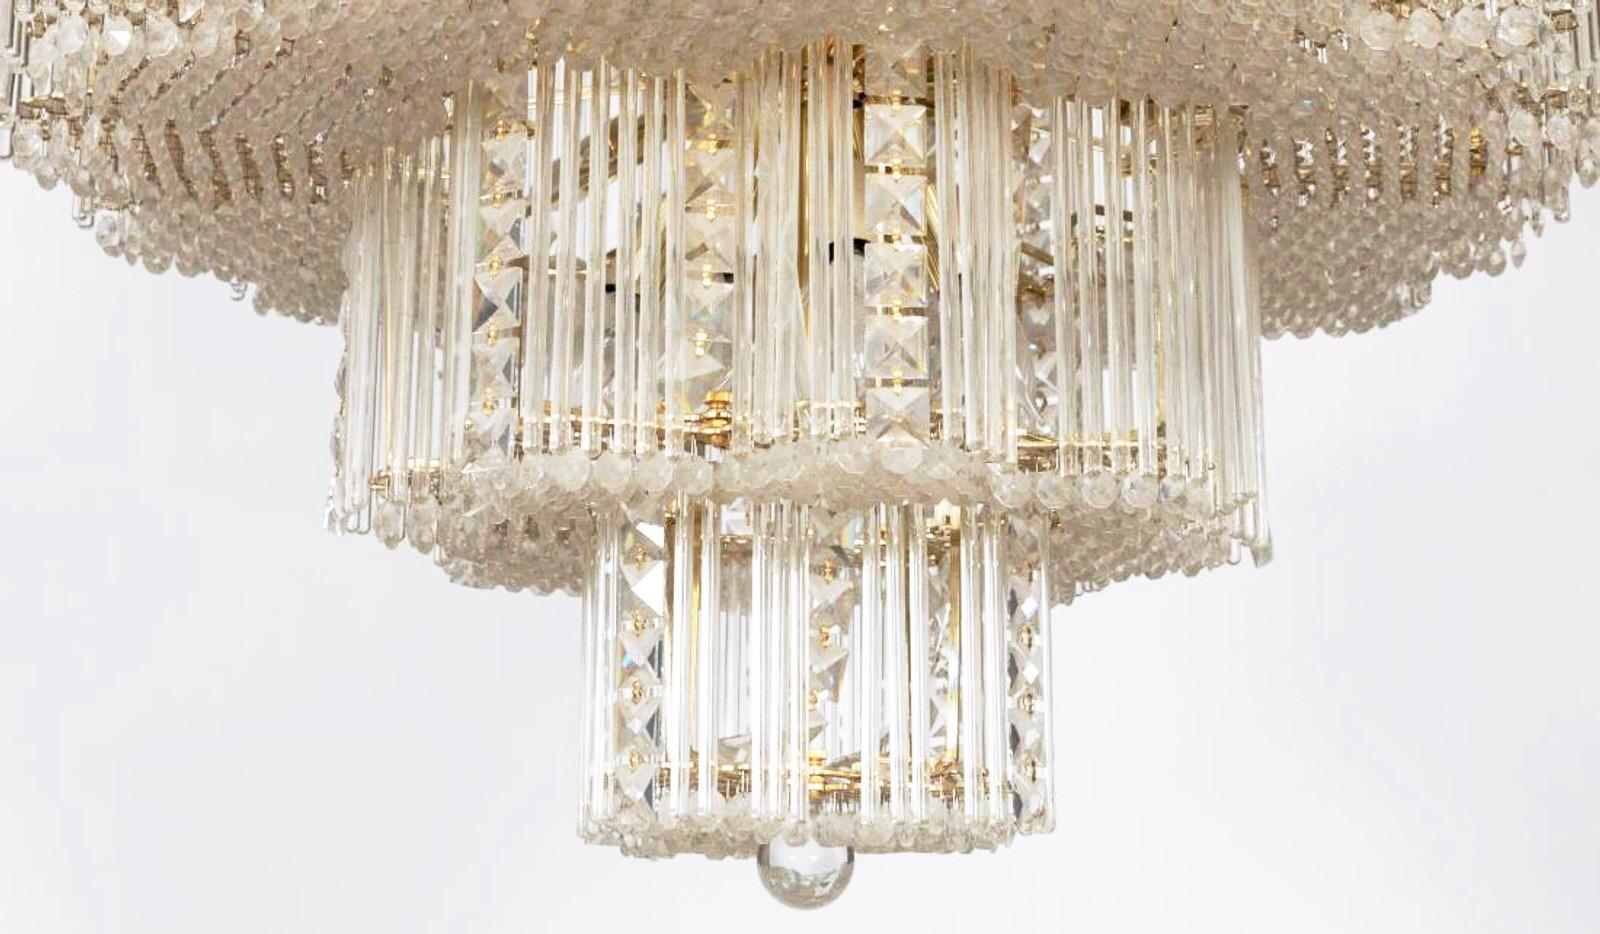 Italian Leaded Glass & Brass Monumental Mid-Century Chandelier, Gaetano Sciolari .  

Stunning Sciolari chandelier with his trademark long crystal hanging rods mounted on brass fixtures interspersed with elegant geometric chains of glimmering French